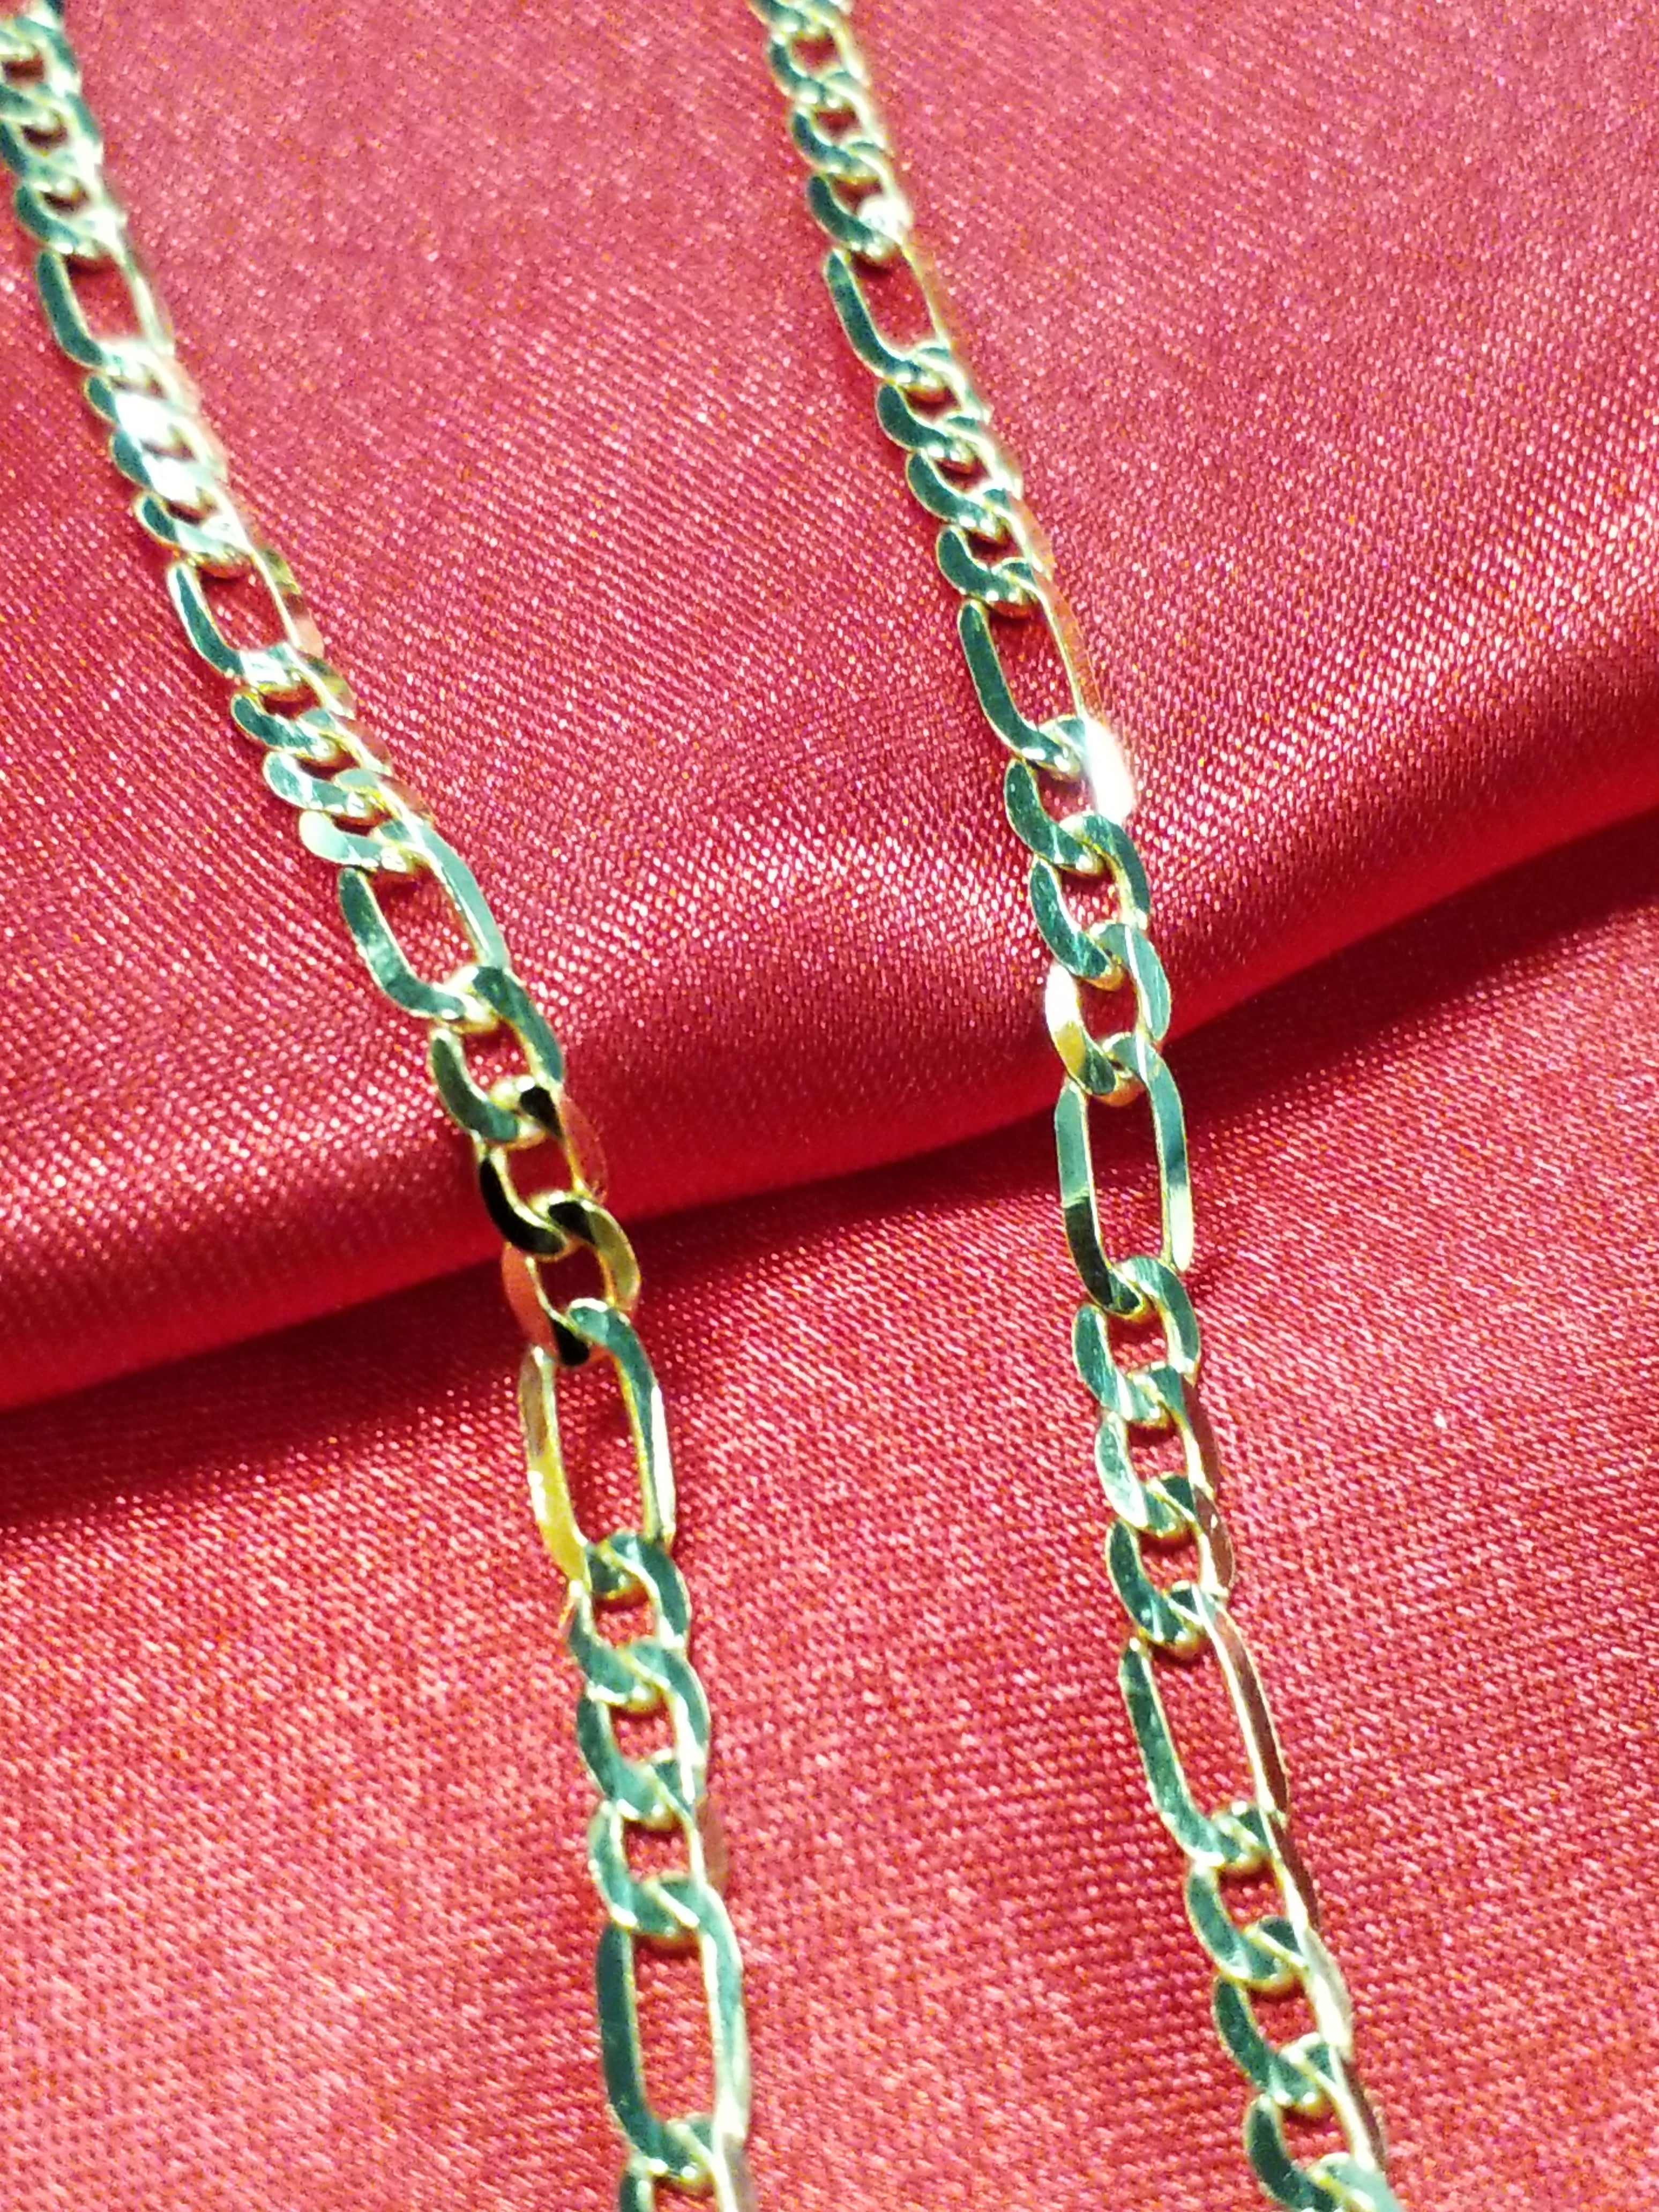 24" 10Kt Yellow Gold Figaro Style Chain